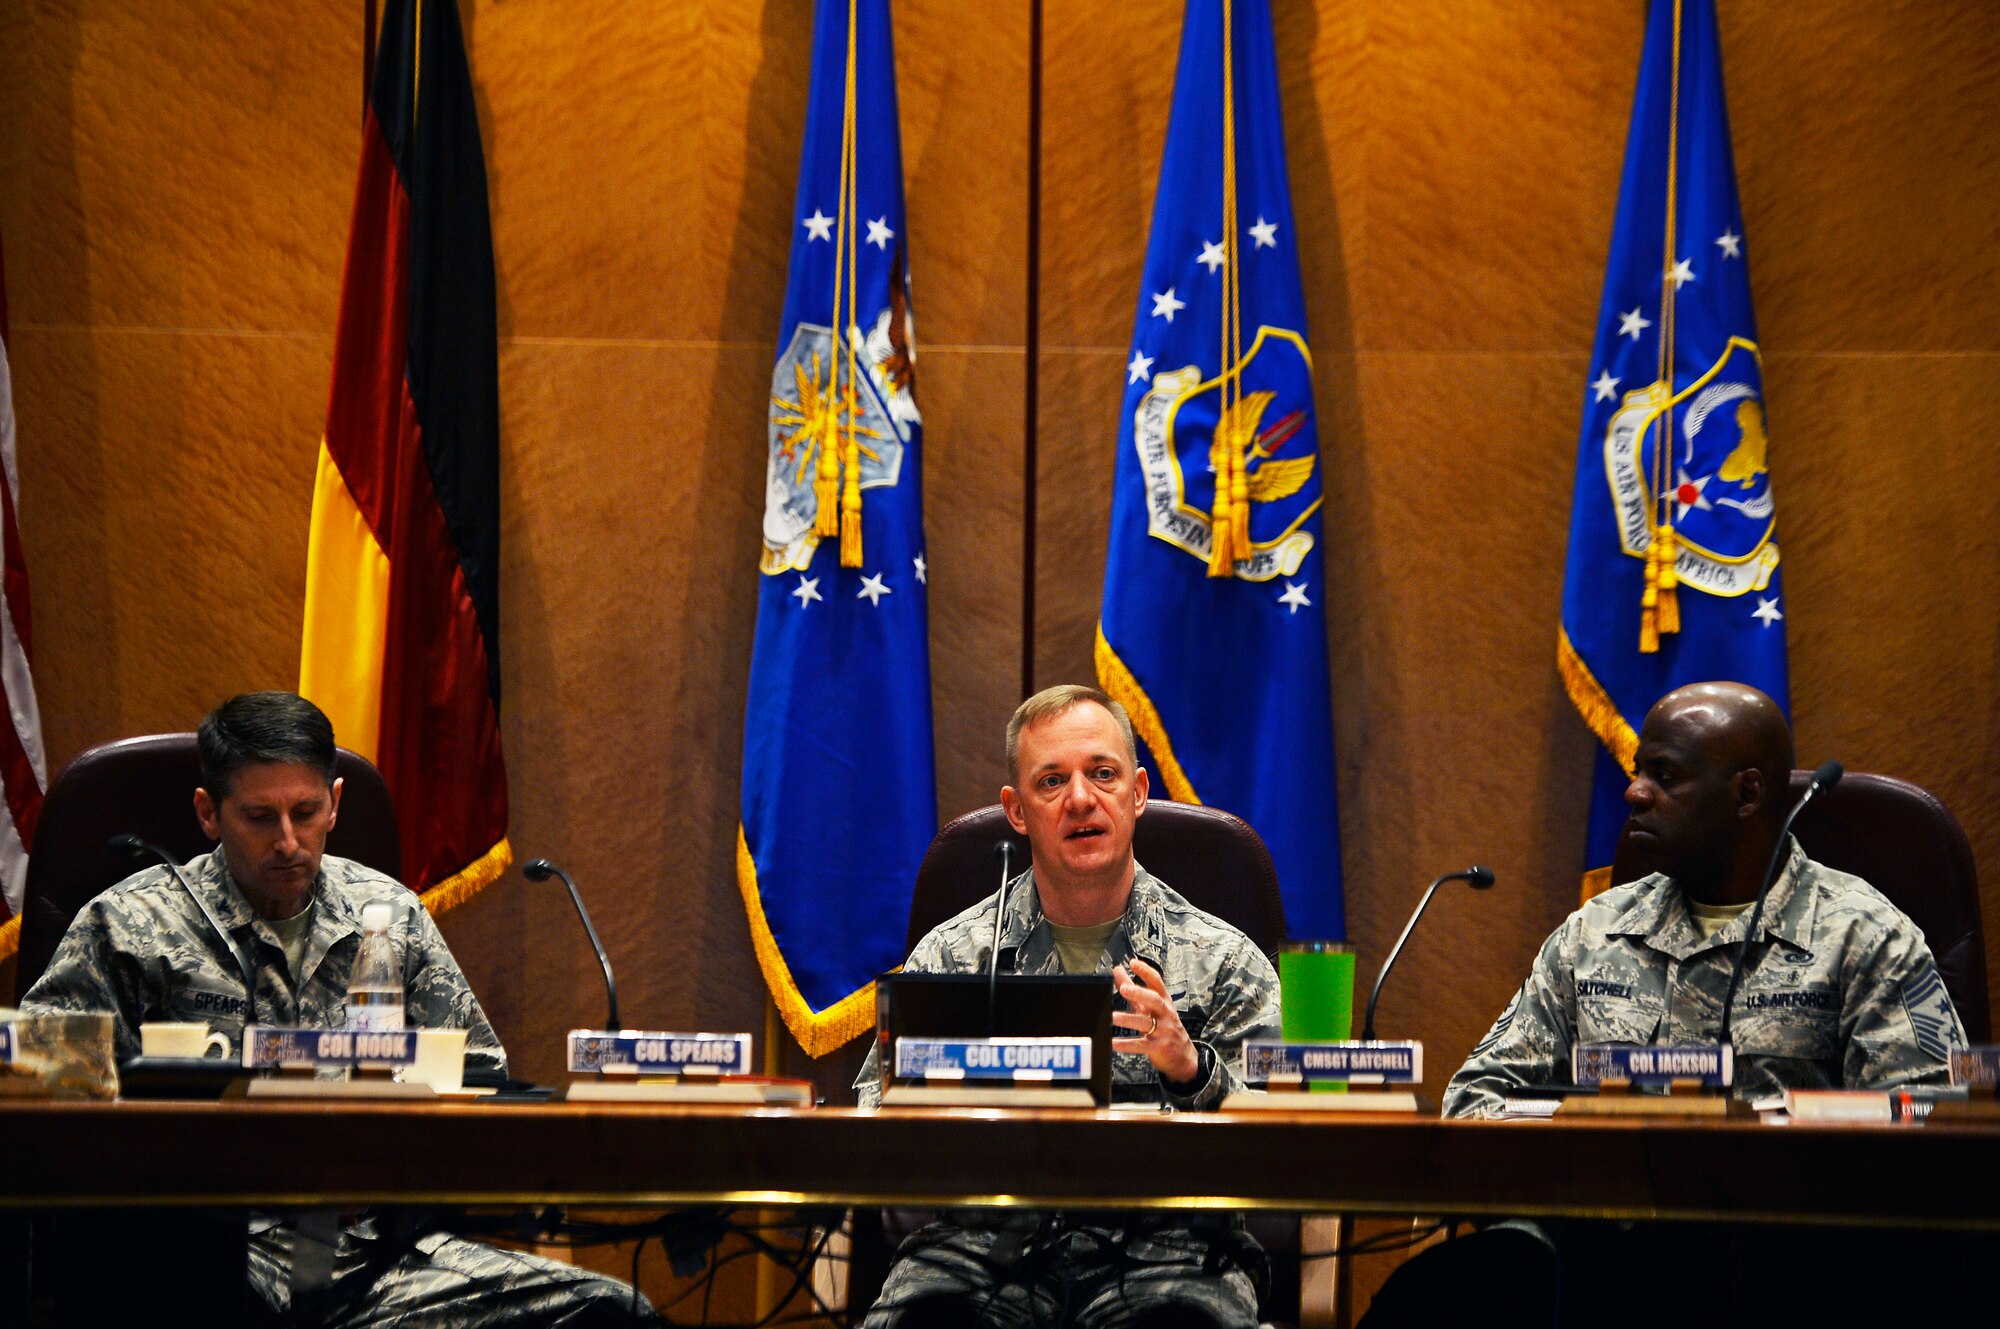 U.S. Air Force Col. Thomas Cooper, 521st Air Mobility Operations Wing commander, addresses 521st Air Mobility Operations Wing leadership during a conference on Ramstein Air base, Germany, Feb. 21, 2018. Group and squadron commanders, superintendents and first sergeants came from various installations across Europe and Southwest Asia to discuss topics such as mission readiness, unit effectiveness, and Airmen morale and readiness. (U.S. Air Force photo by Senior Airman Joshua Magbanua)